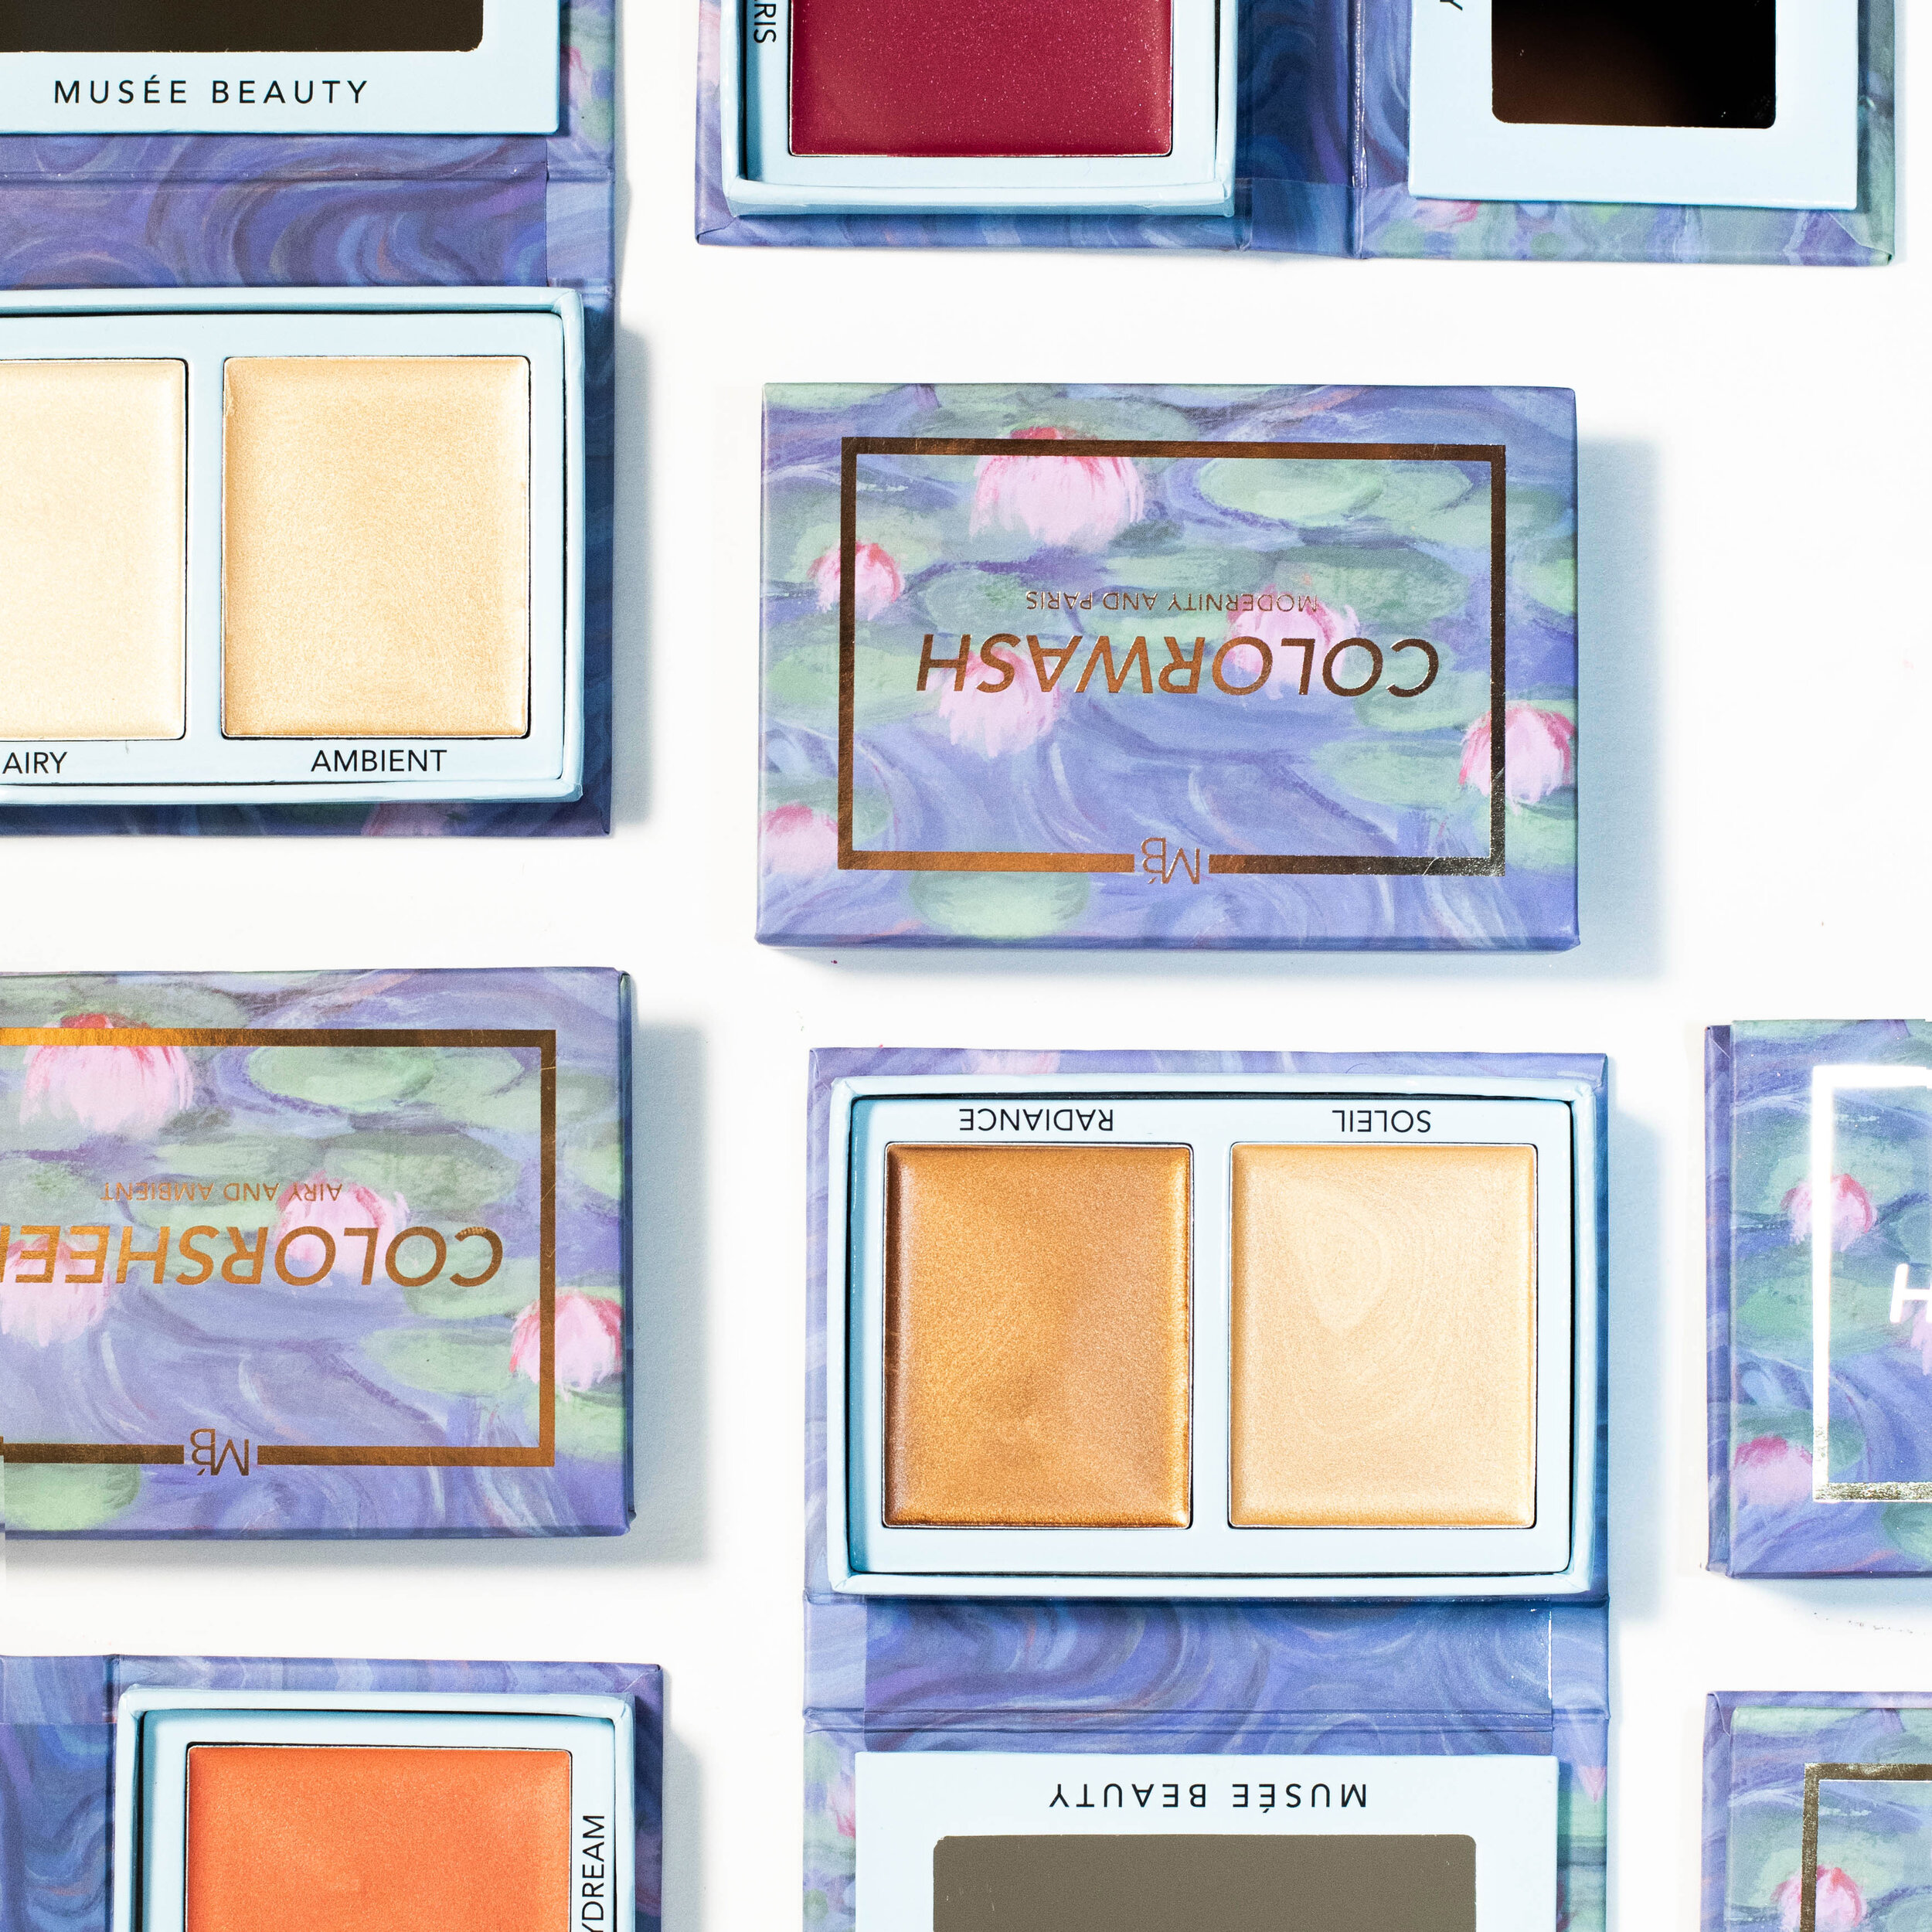 musee-beauty-ad-palette.jpg